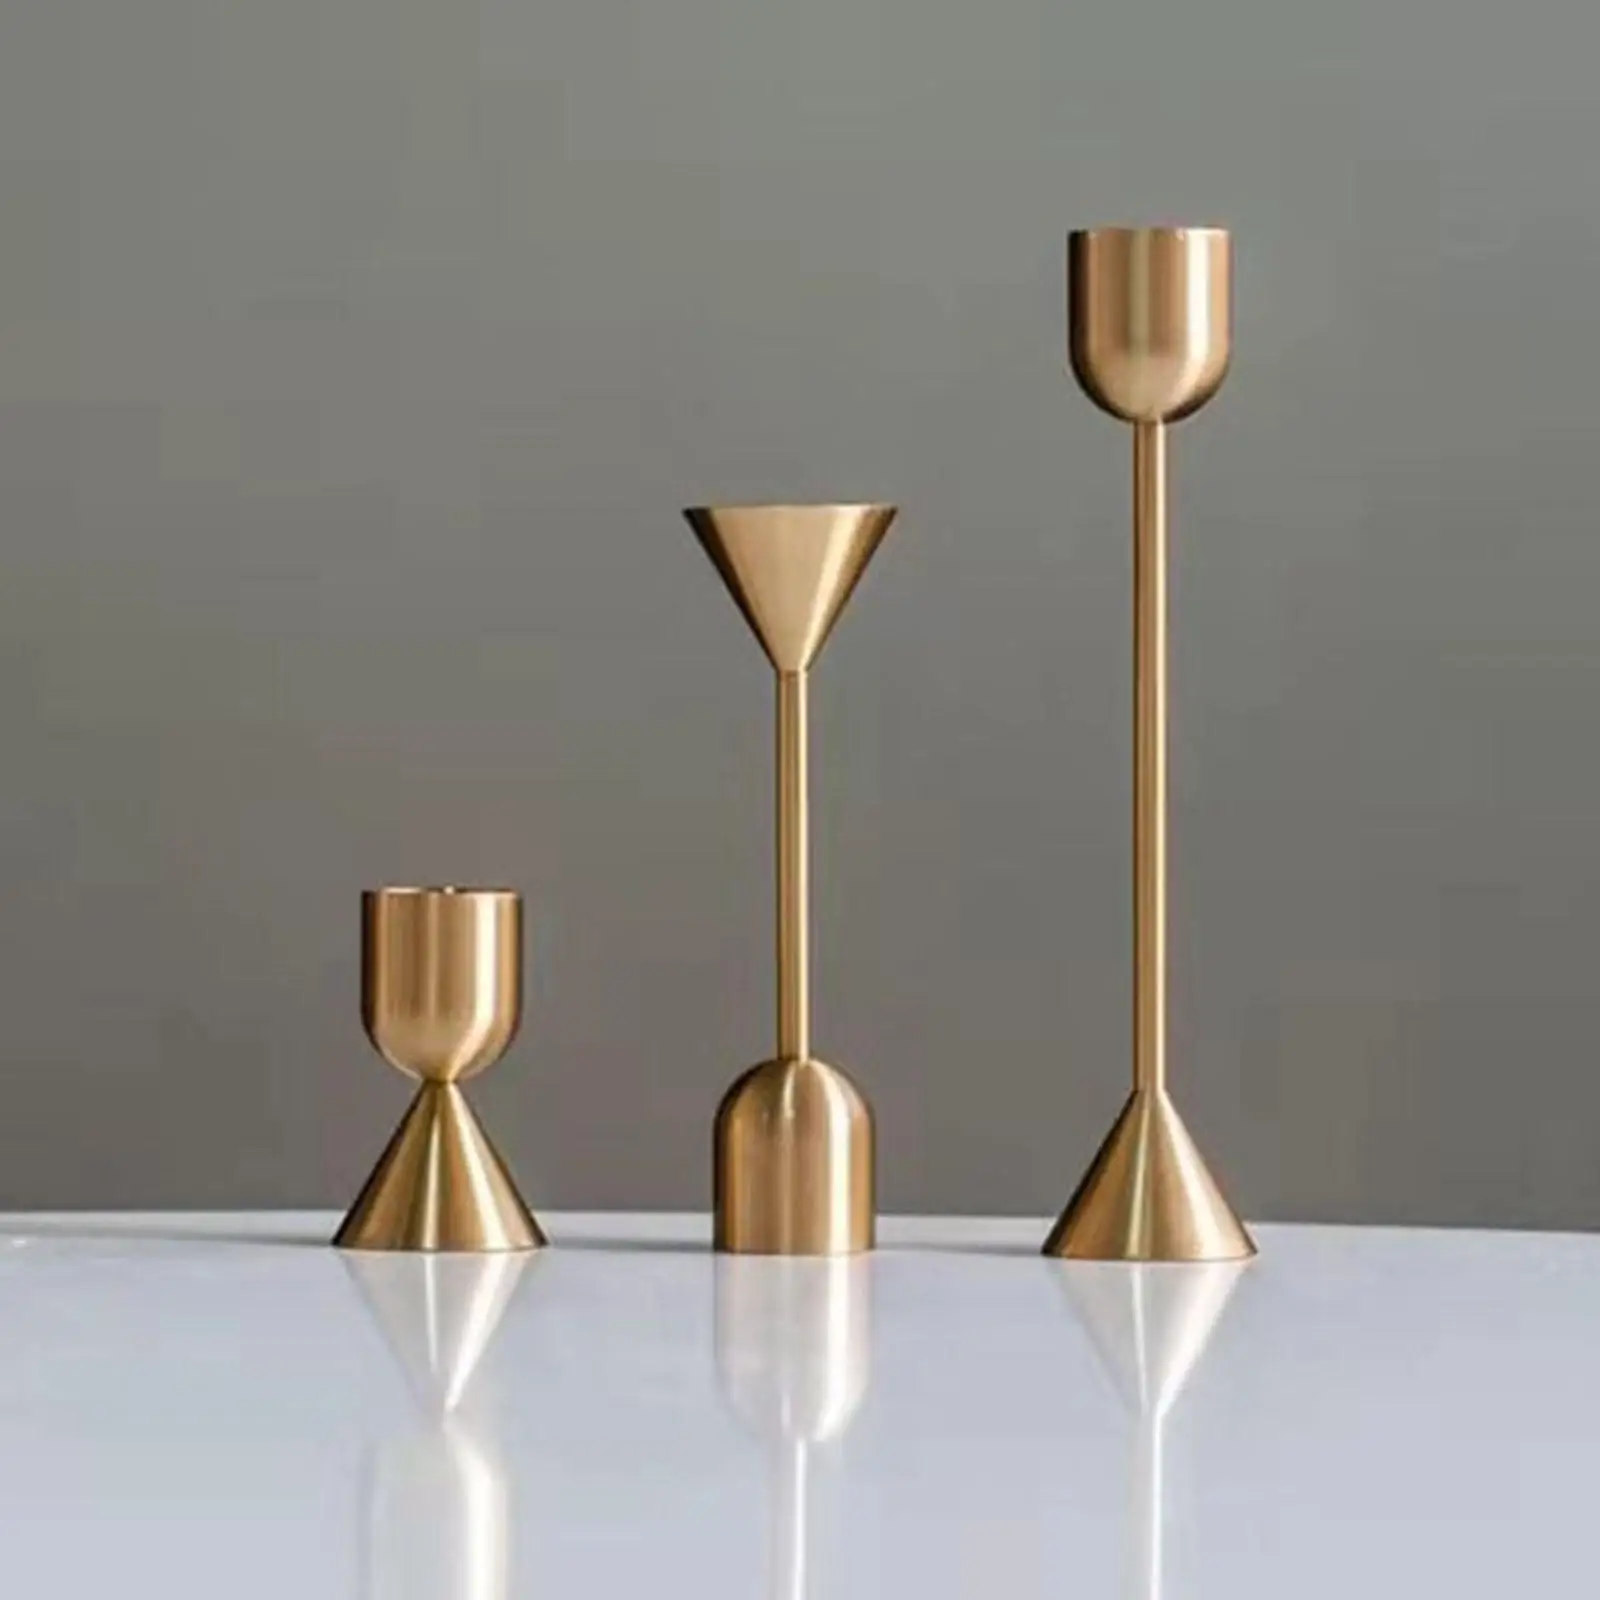 3 Pieces Candle Holder Gold Iron Candlestick for Dinning Hotel Desktop Home